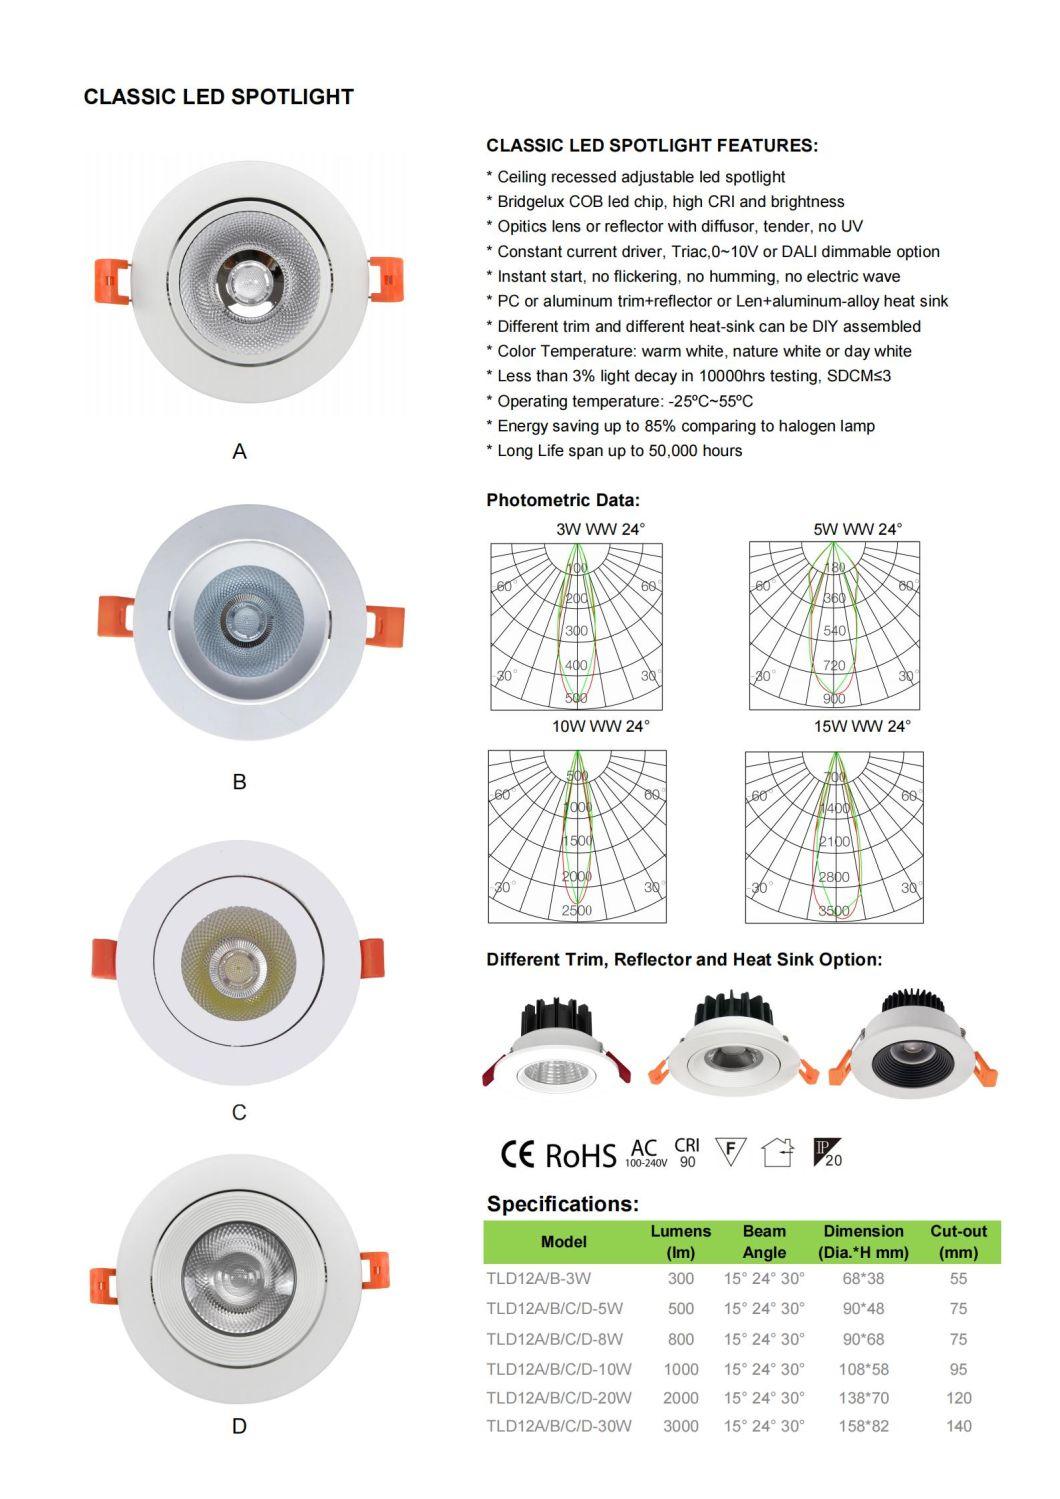 5W Classic Anti-Glare Ceiling Recessed Adjustable LED Spot Downlight for Commercial Project Office Hotel Apartment Residential Corridor Rooms Spotlight